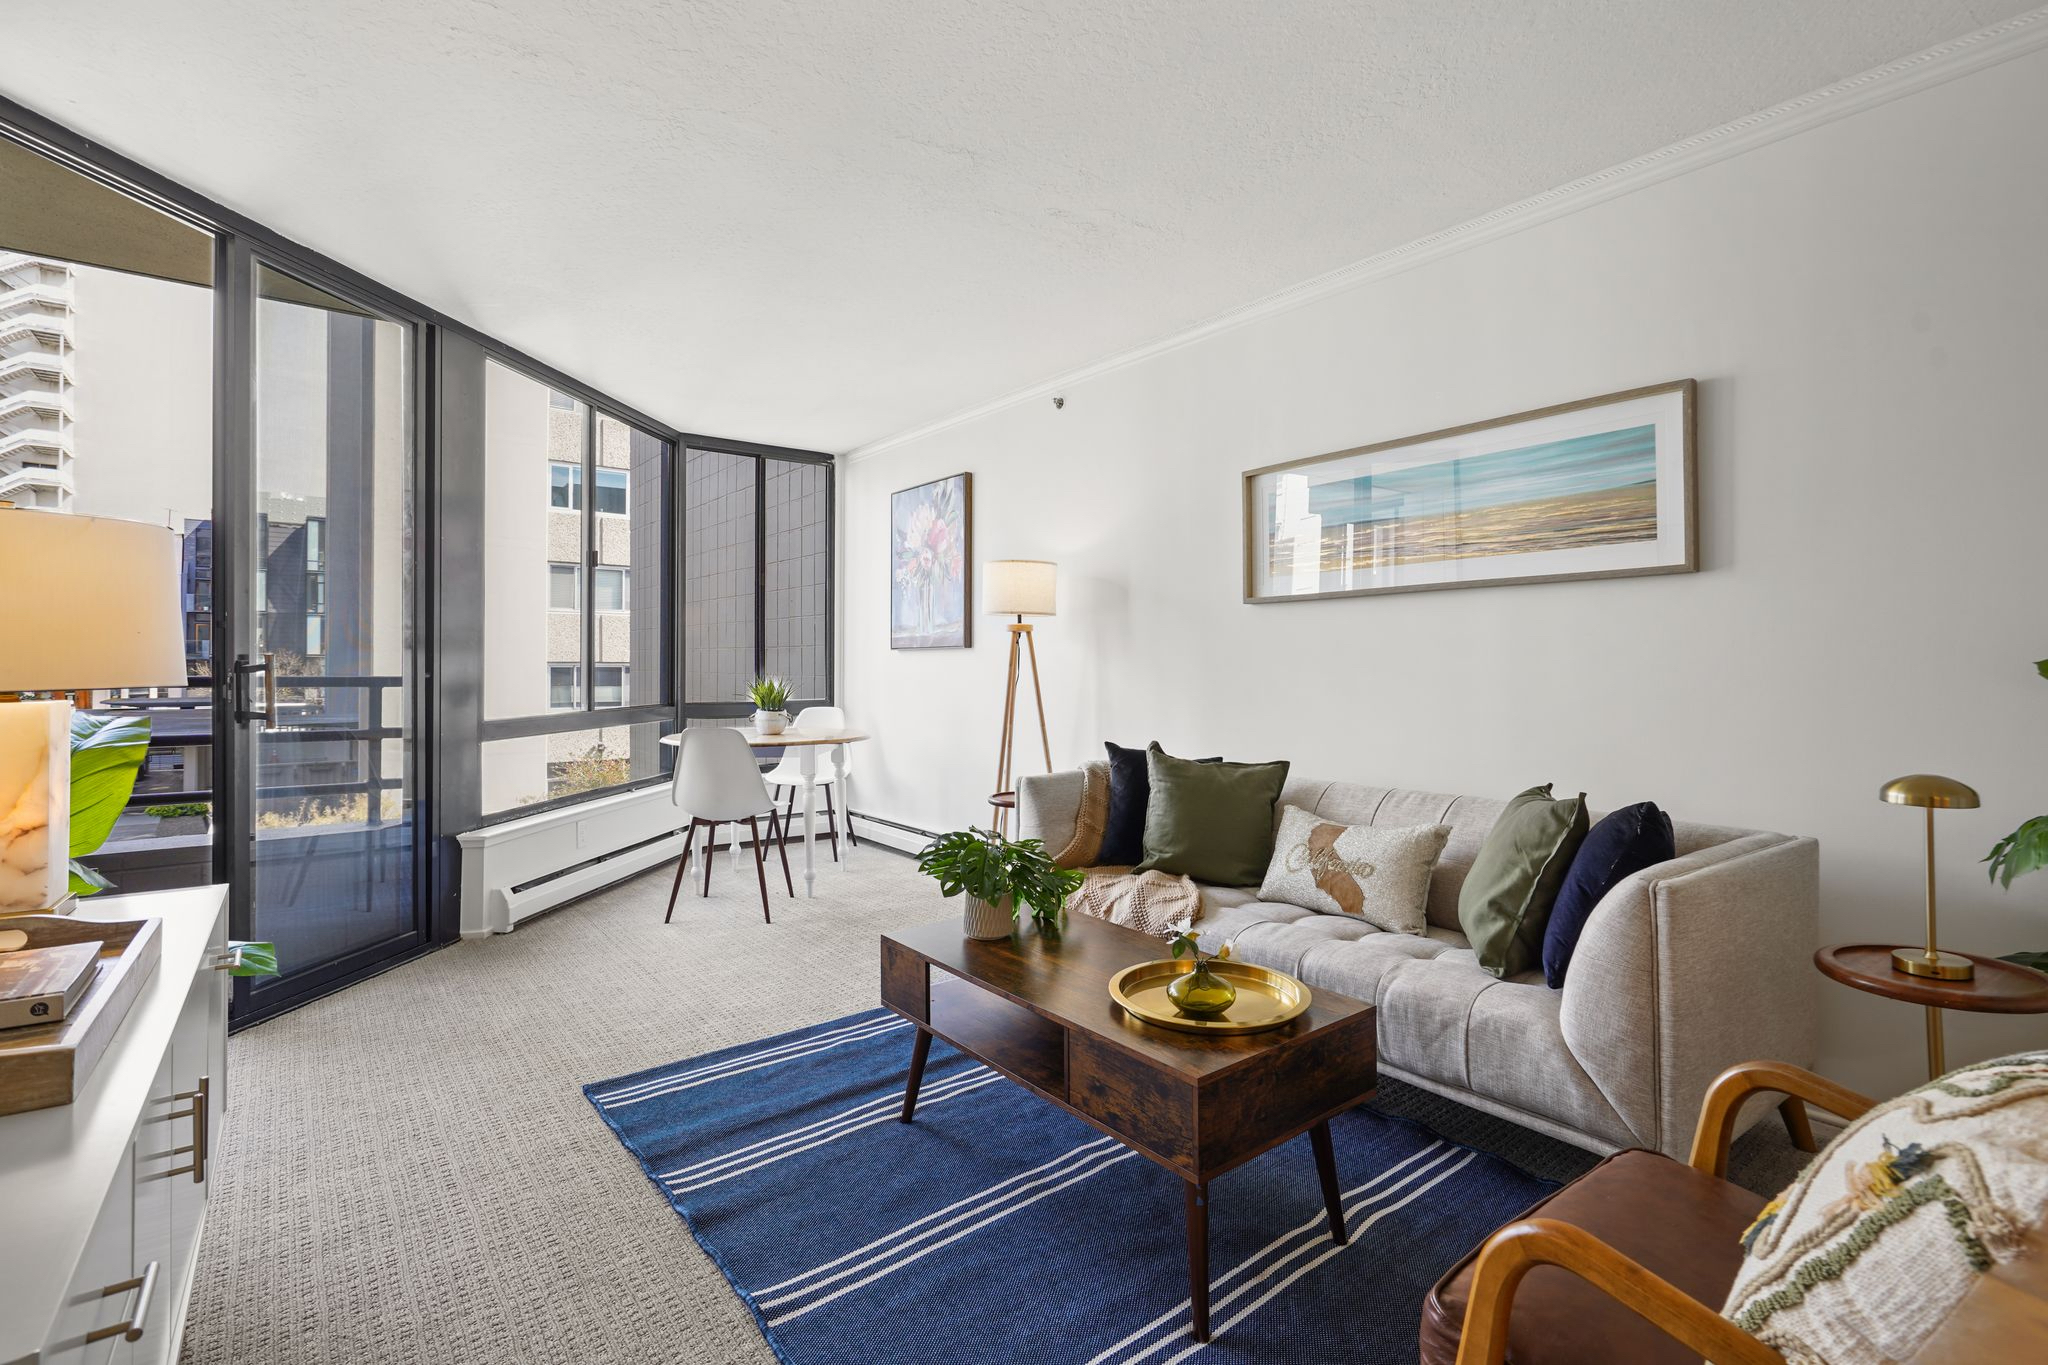 A staged living room for a condo listing shows a couch and coffee table.